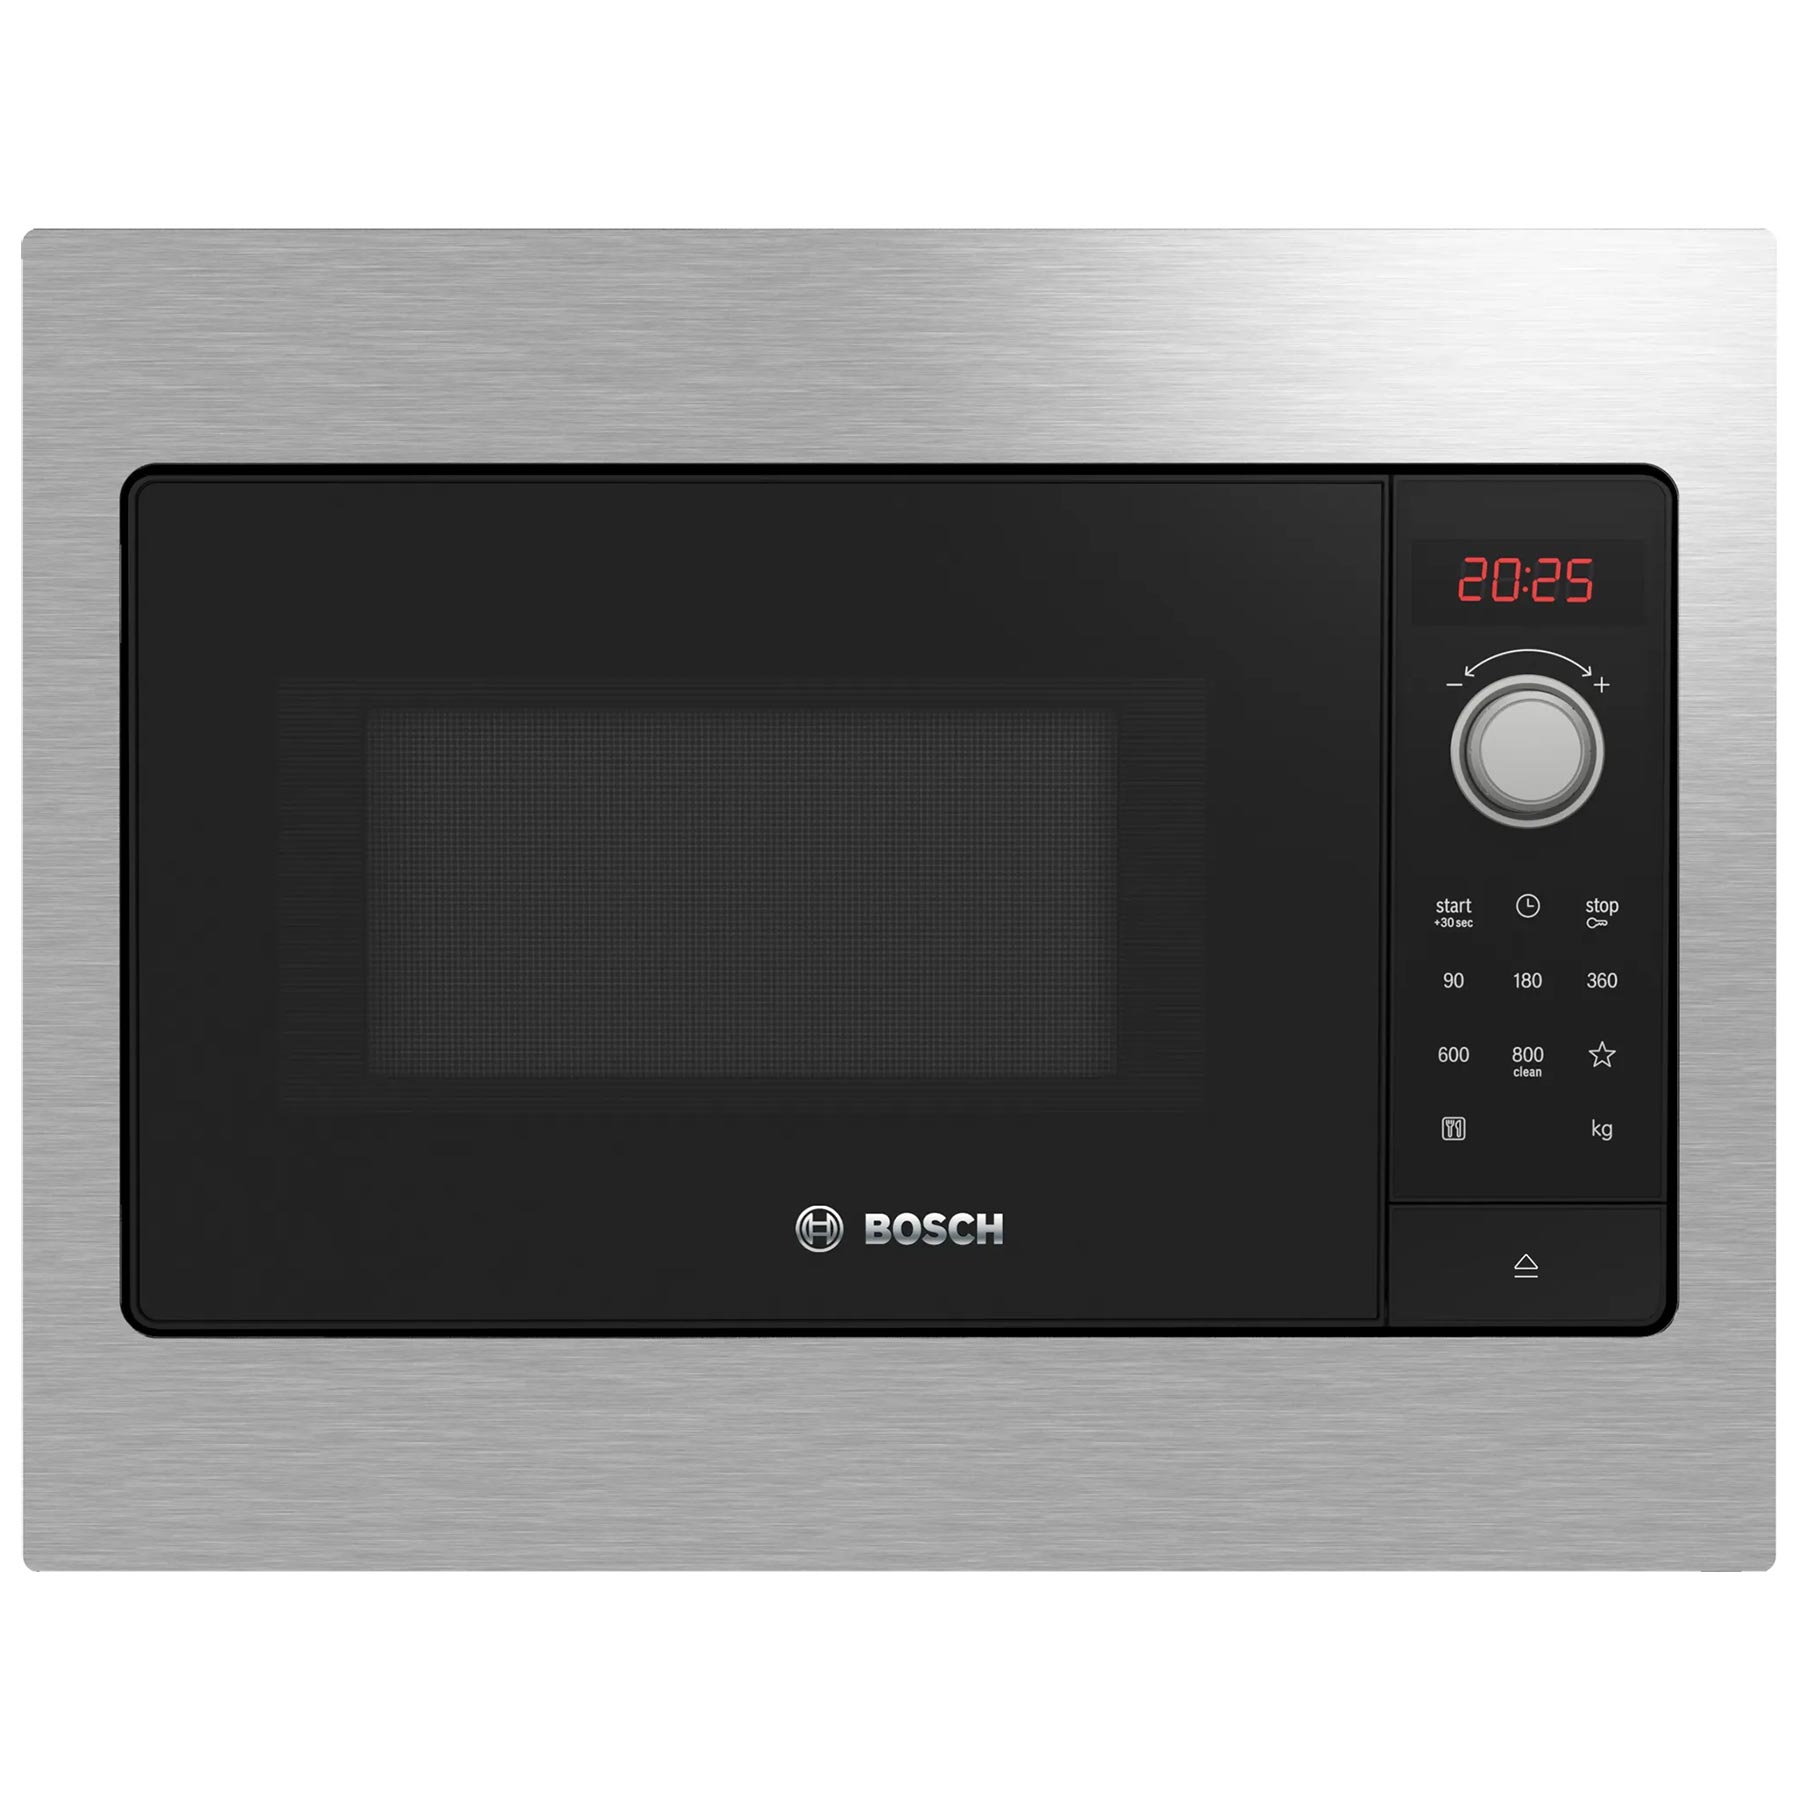 Image of Bosch BFL523MS3B Series 2 Built in Compact Microwave Oven Black 800W 2